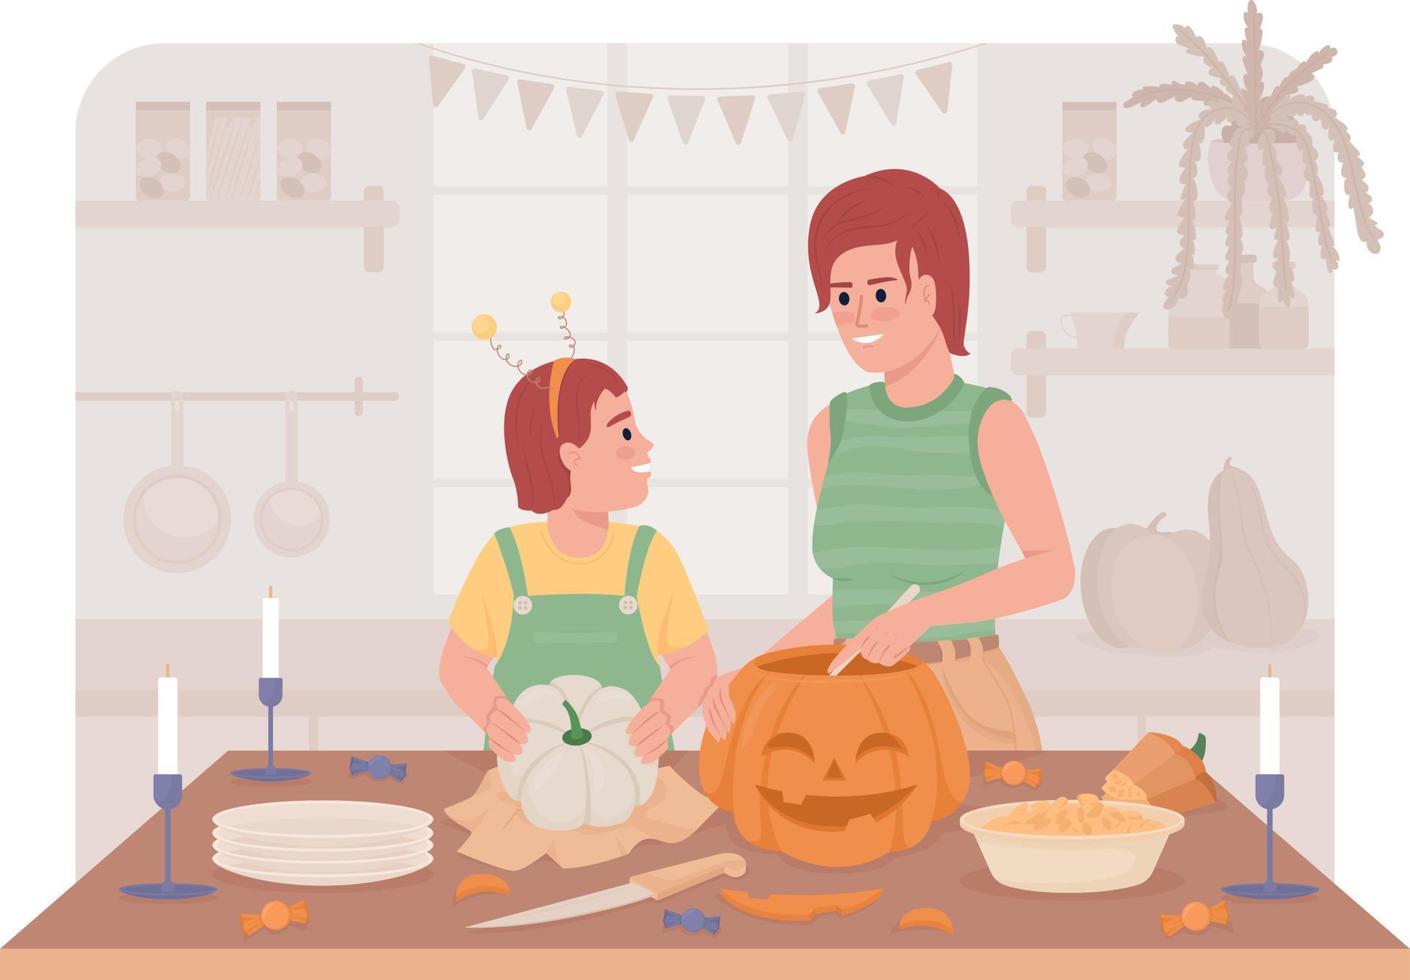 Carving pumpkins 2D vector isolated illustration. Mother and daughter preparing for holiday flat characters on cartoon background. Halloween colourful editable scene for mobile, website, presentation